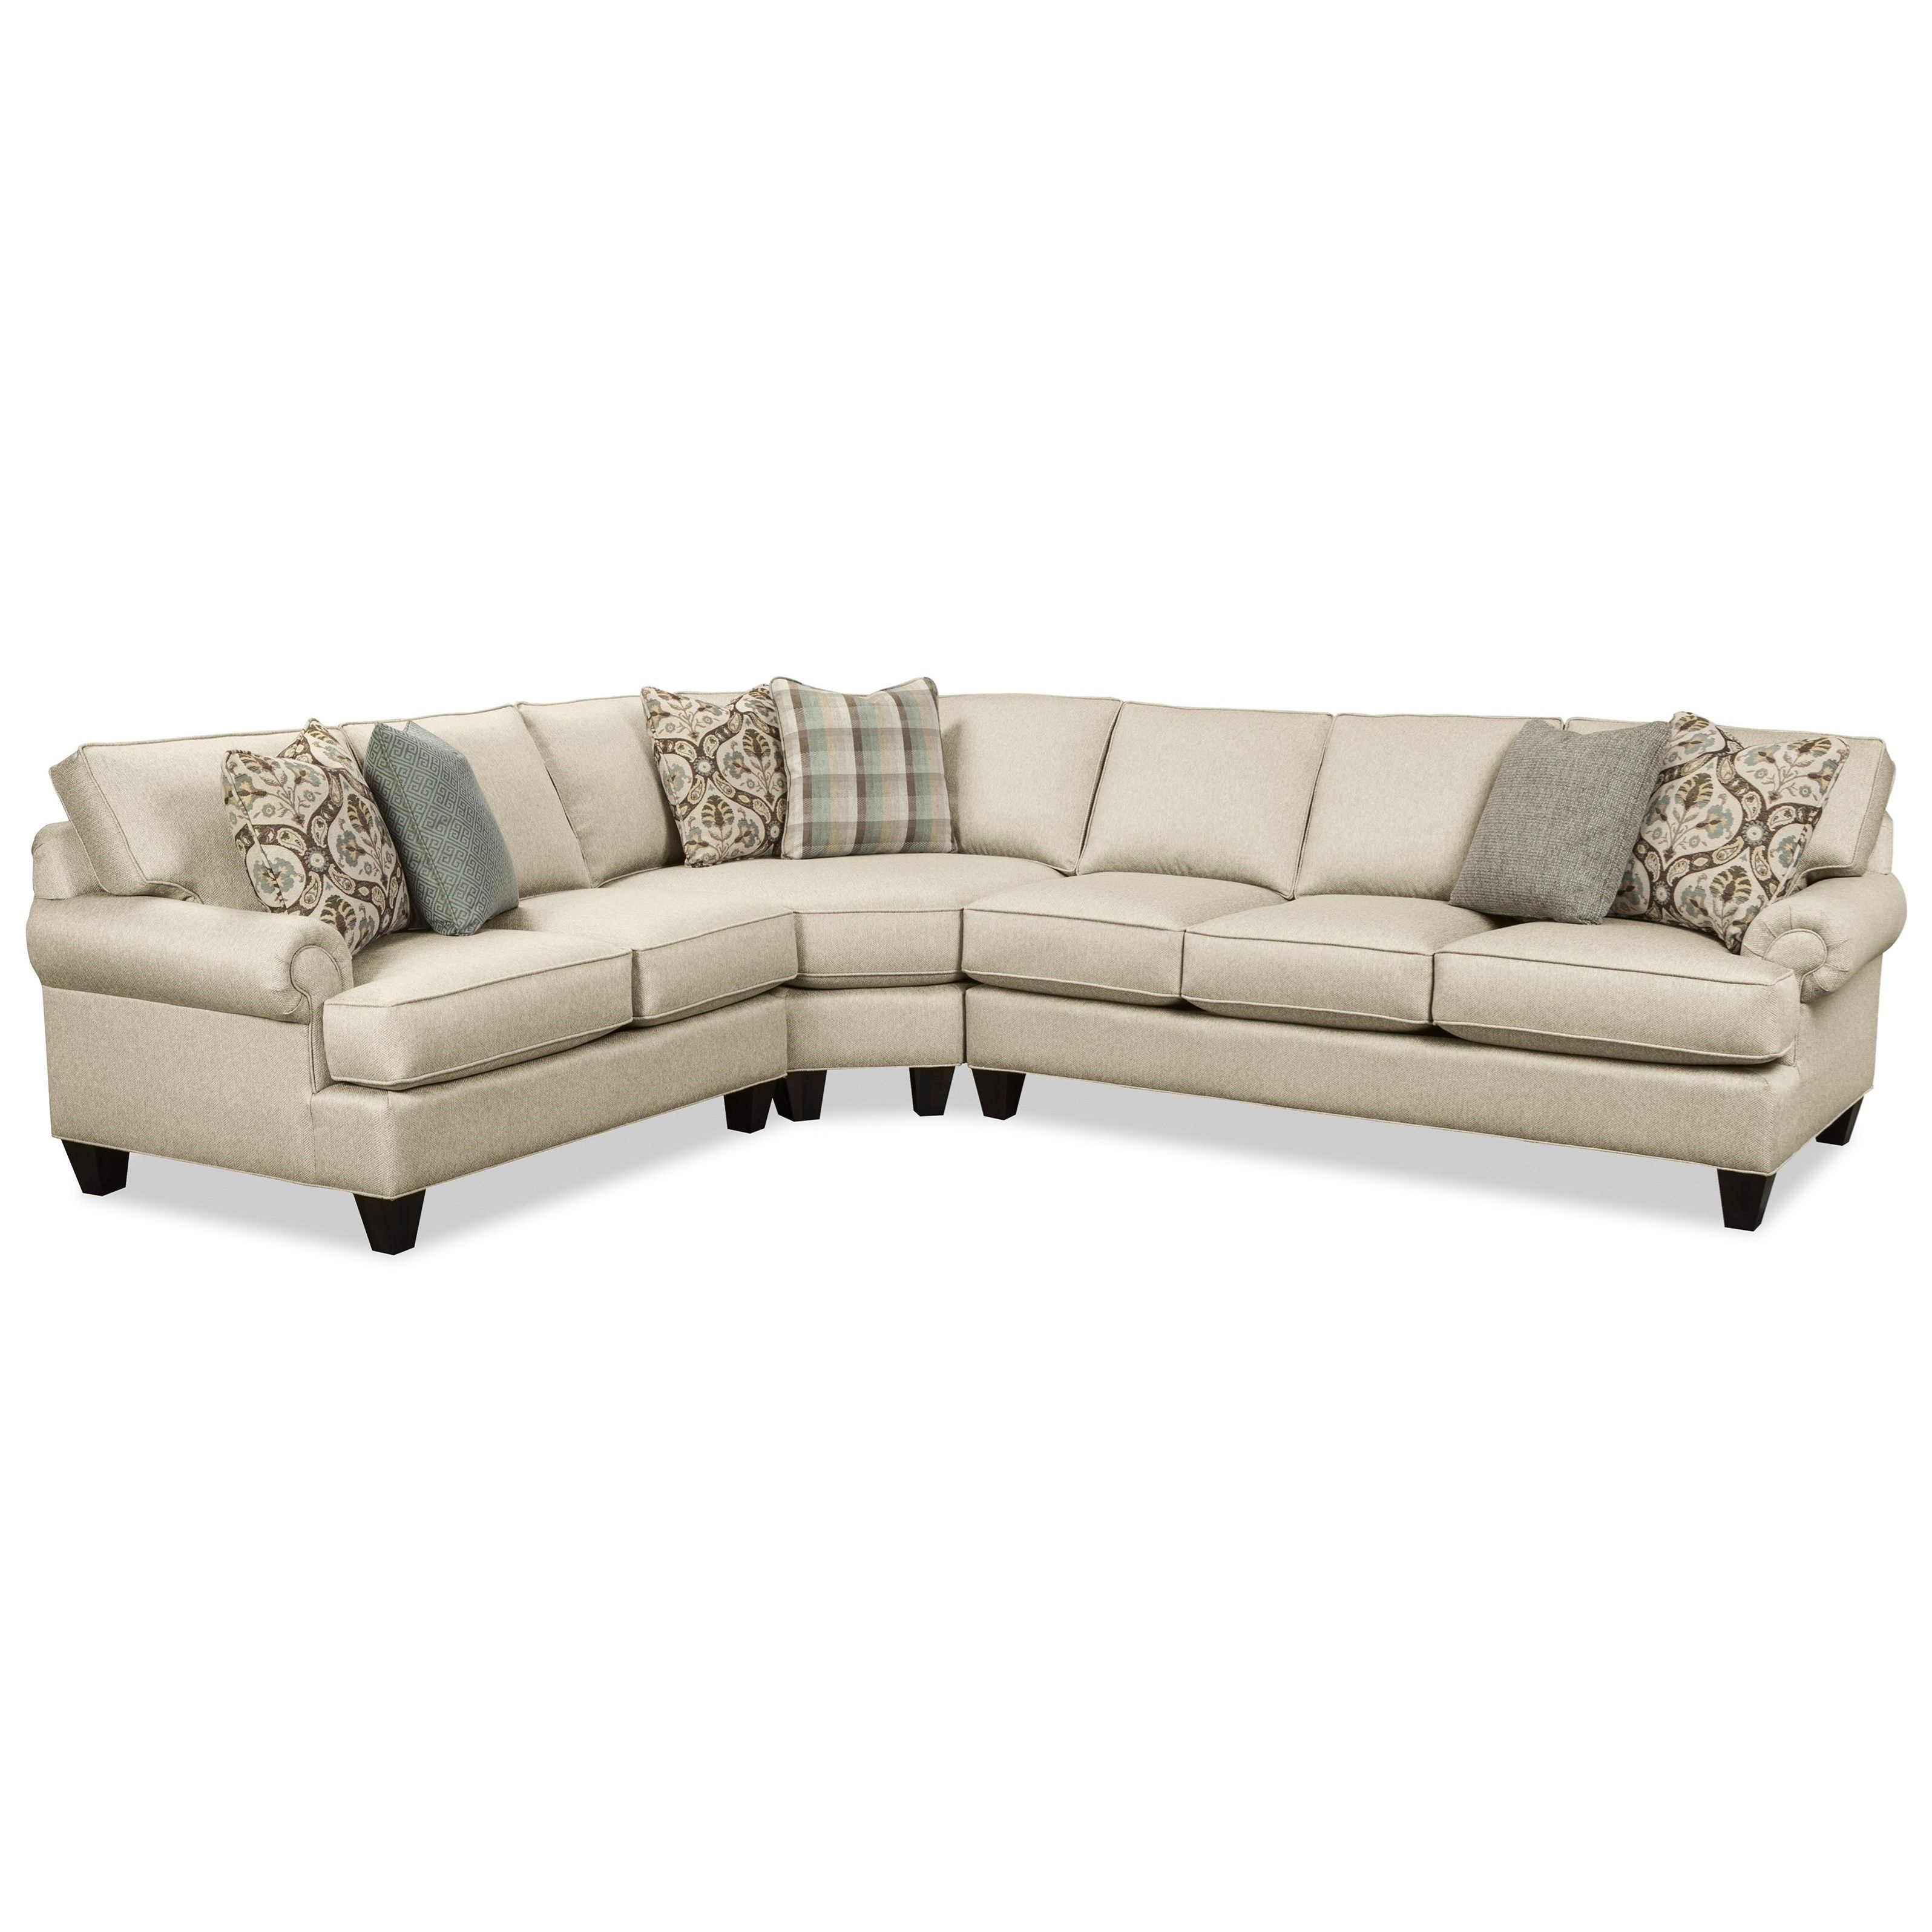 Craftmaster C9 Custom Collection Customizable Three Piece Sectional In Adeline 3 Piece Sectionals (View 9 of 30)